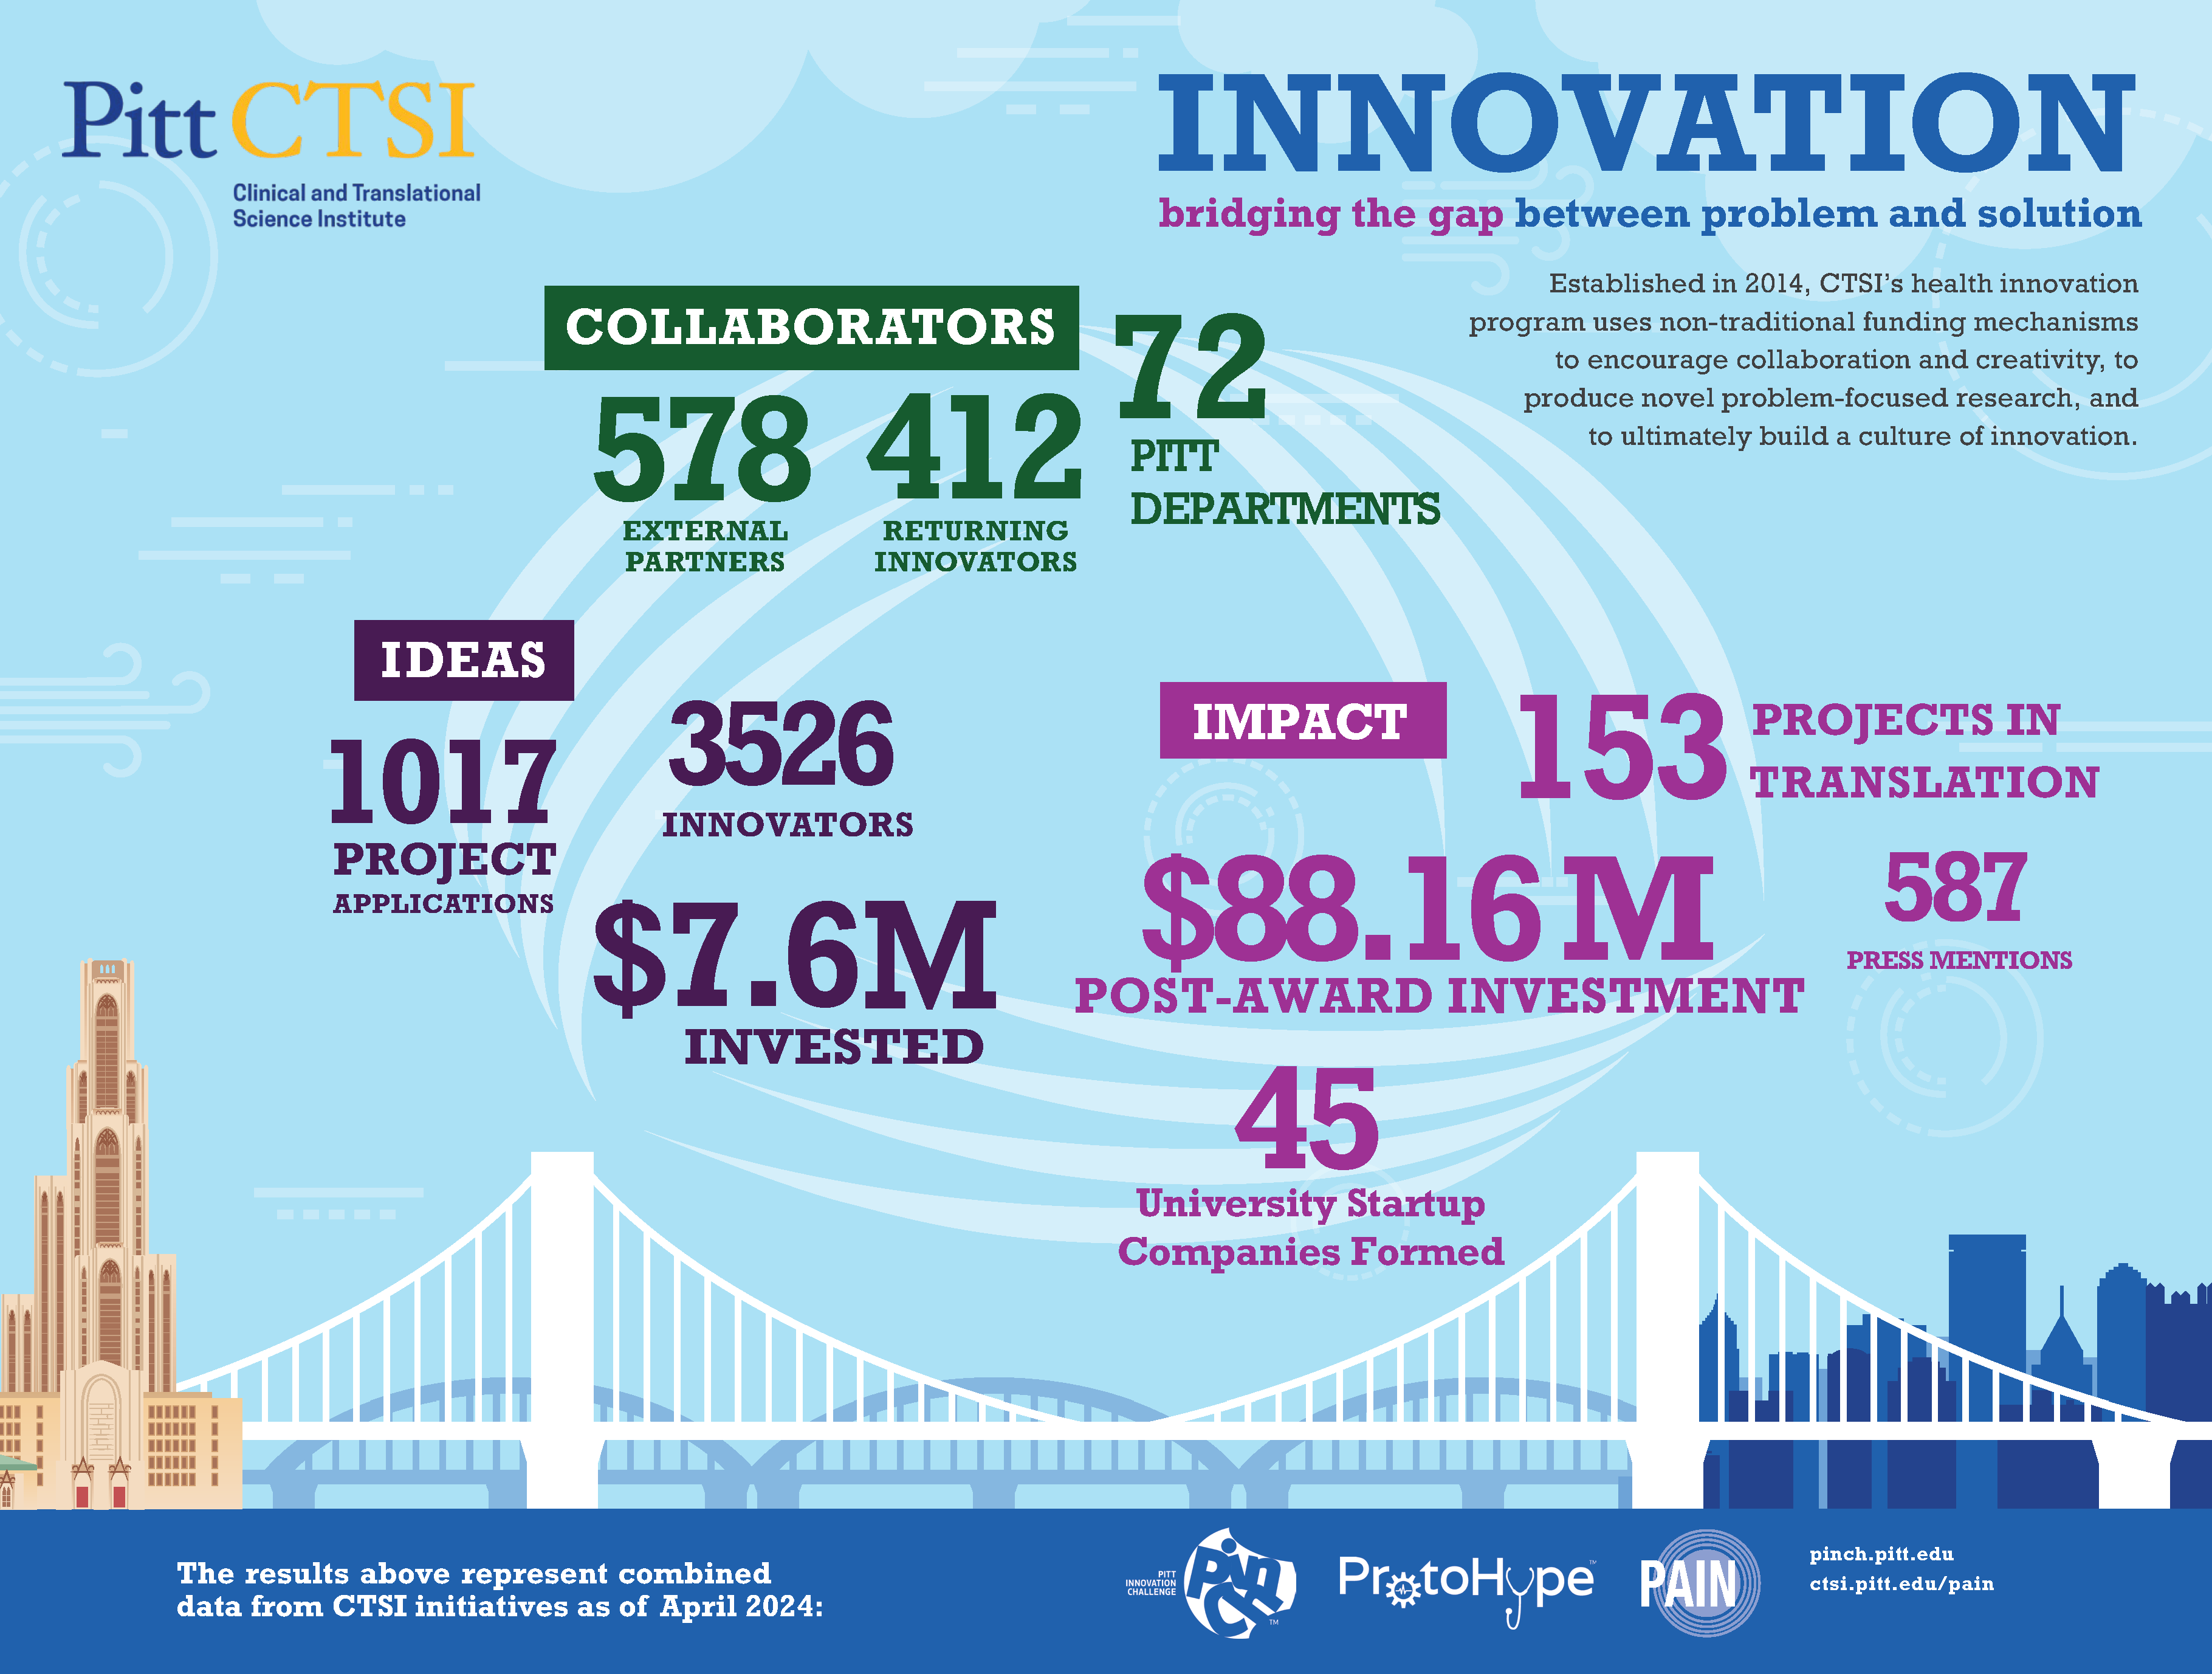 Established in 2014, CTSI's health innovation program uses non-traditional funding mechanisms to encourage collaboration & creativity, to produce novel problem-focused research, and to ultimately build a culture of innovation. Collaborators: 535 external partners, 367 returning innovators, 68 Pitt departments. Ideas: 881 project applications, 2985 innovators, $5.9M invested. Impact: 403 press mentions, 123 projects in translation, $51.2M post-award investment, $25M from community/industry. As of March 2022.